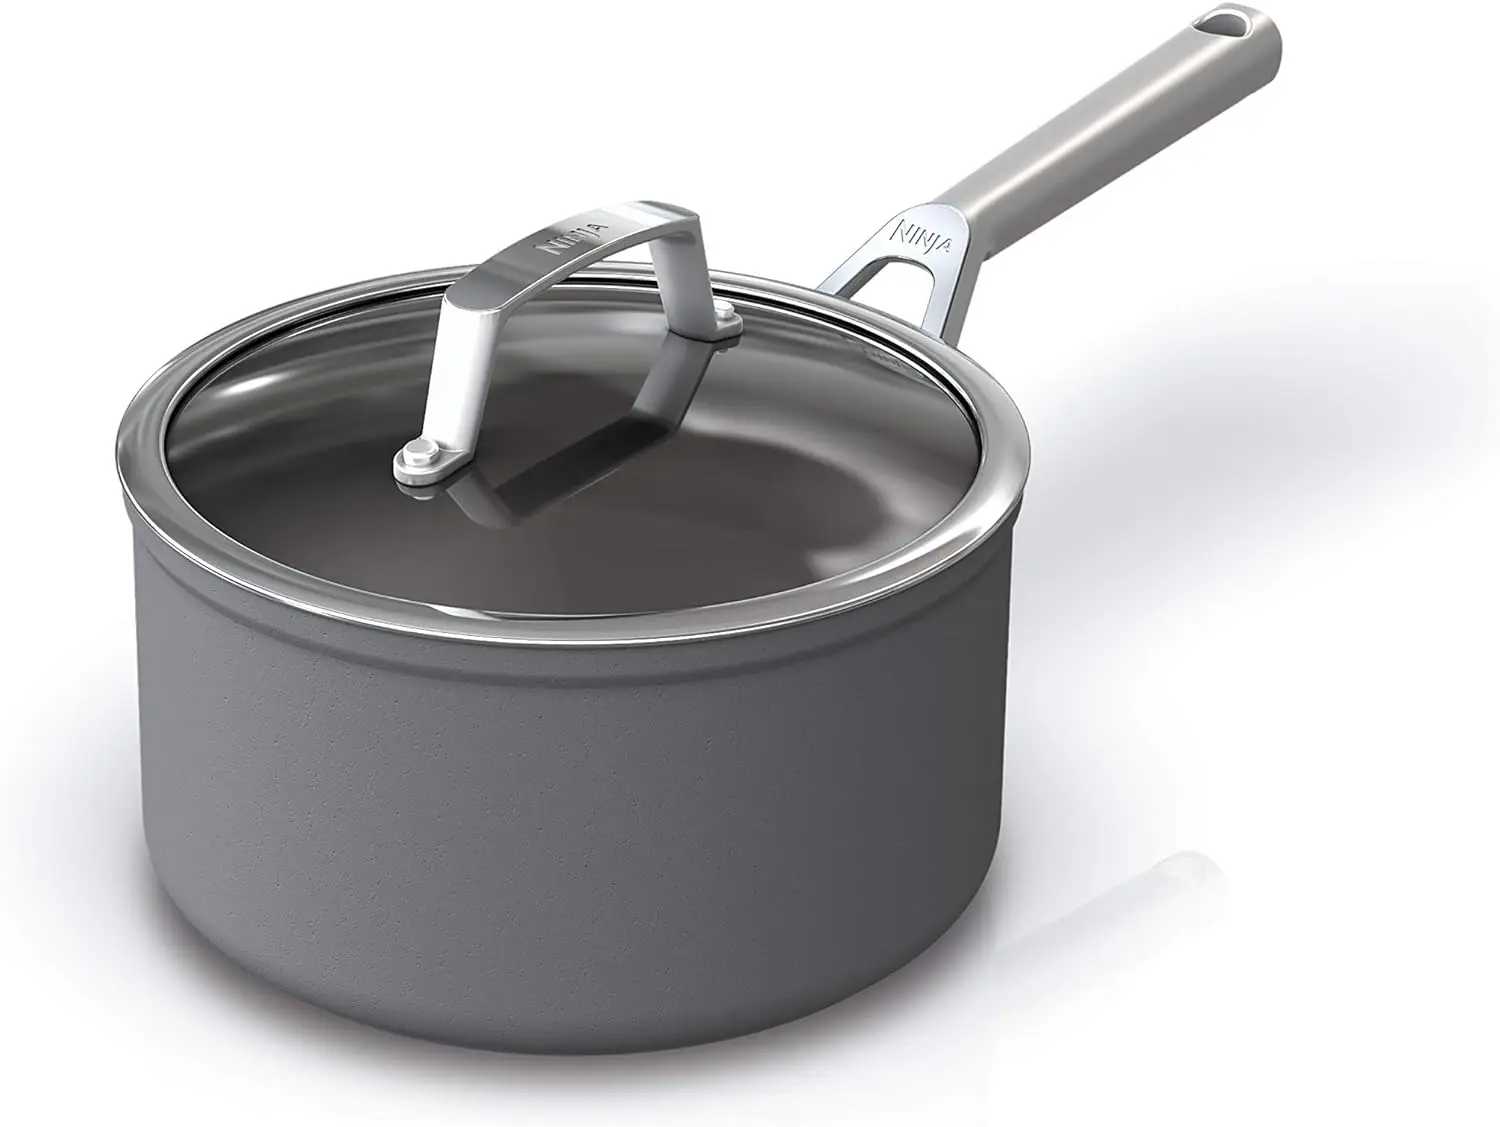 

Foodi NeverStick Premium 3.5-Quart Saucepan with Glass Lid, Hard-Anodized, Nonstick, Durable & Oven Safe to 500°F, Slate Gr Mod